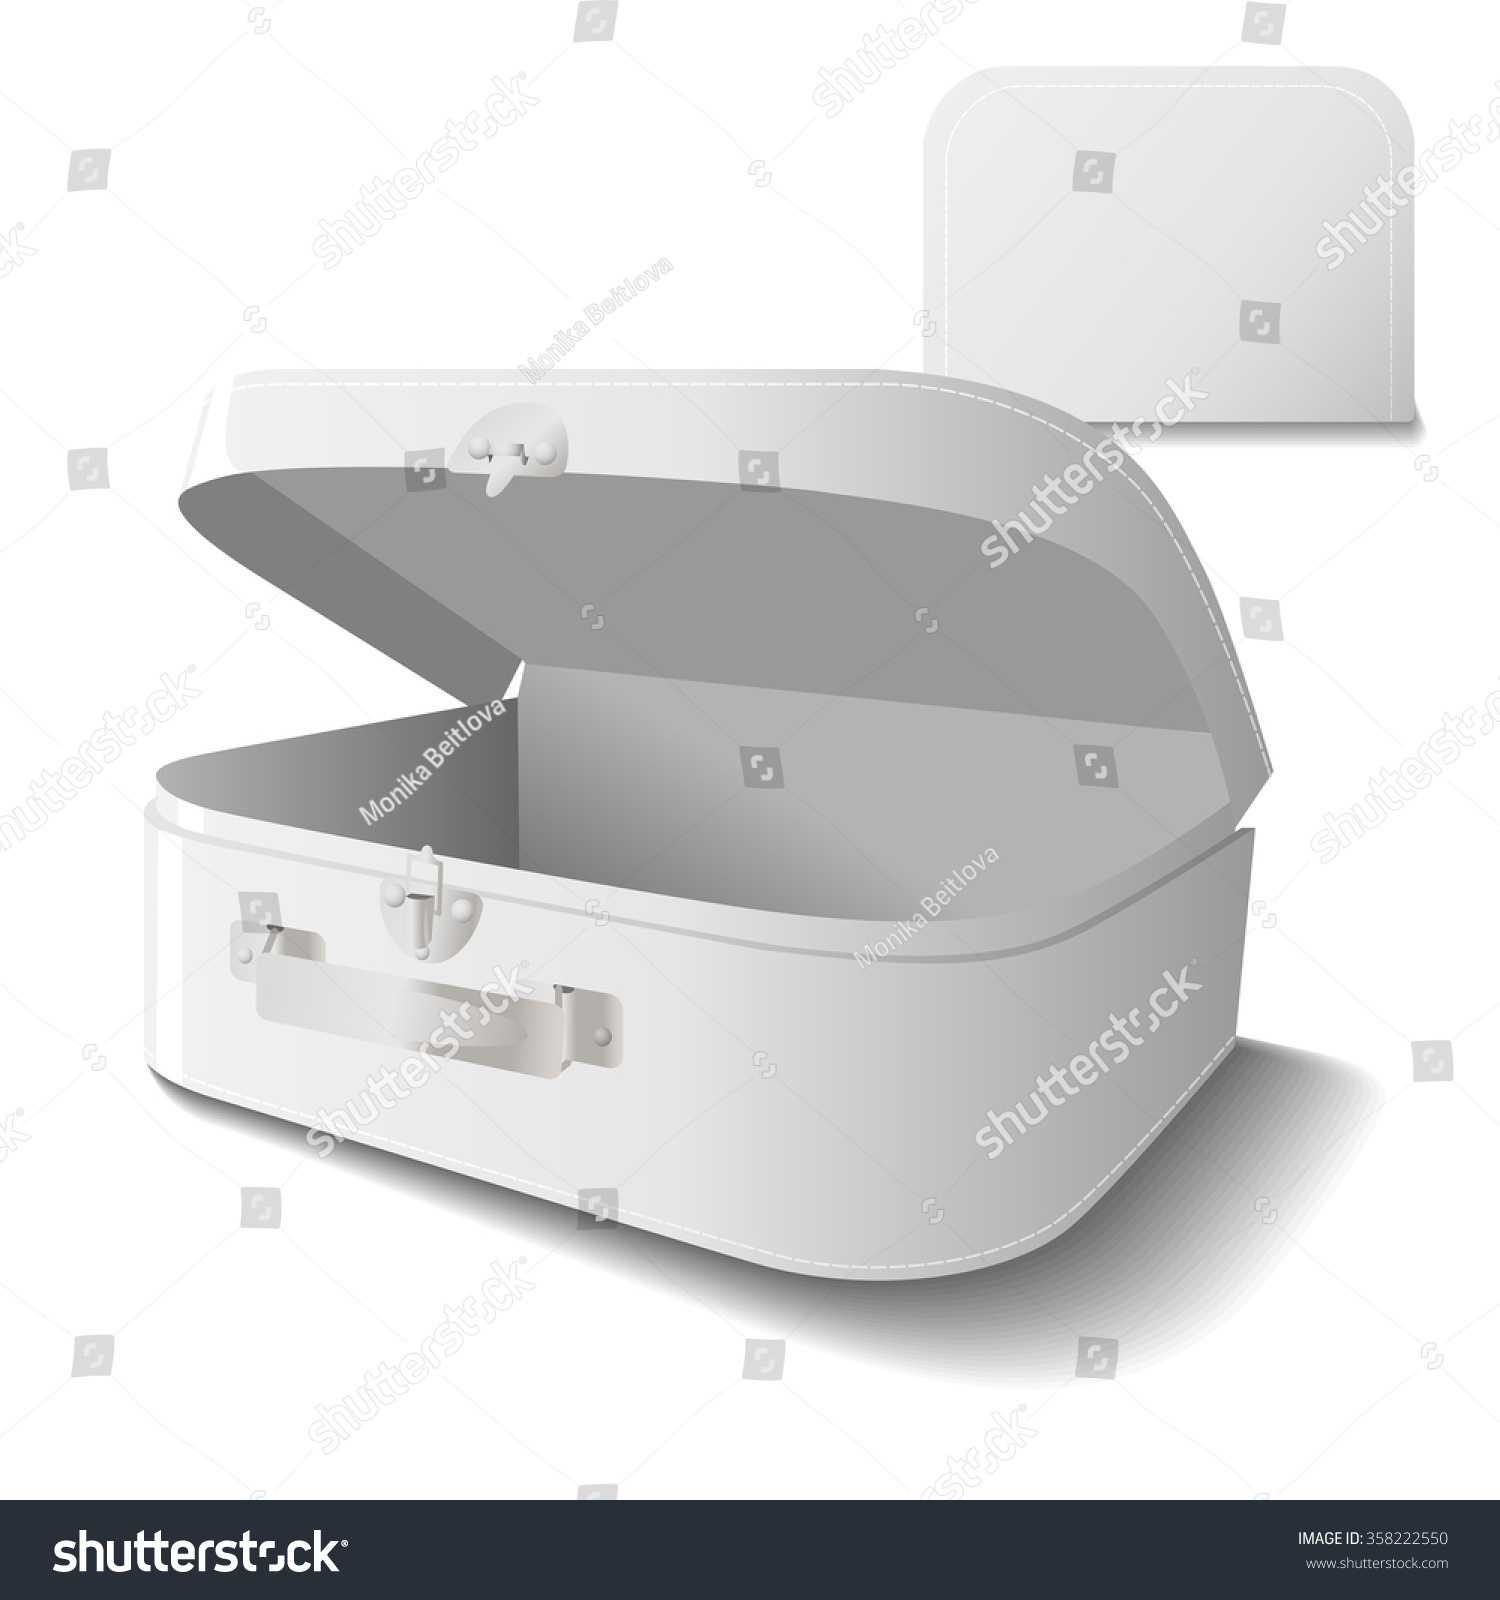 Small Cardboard Suitcase Template Handle White Stock Vector With Blank Suitcase Template